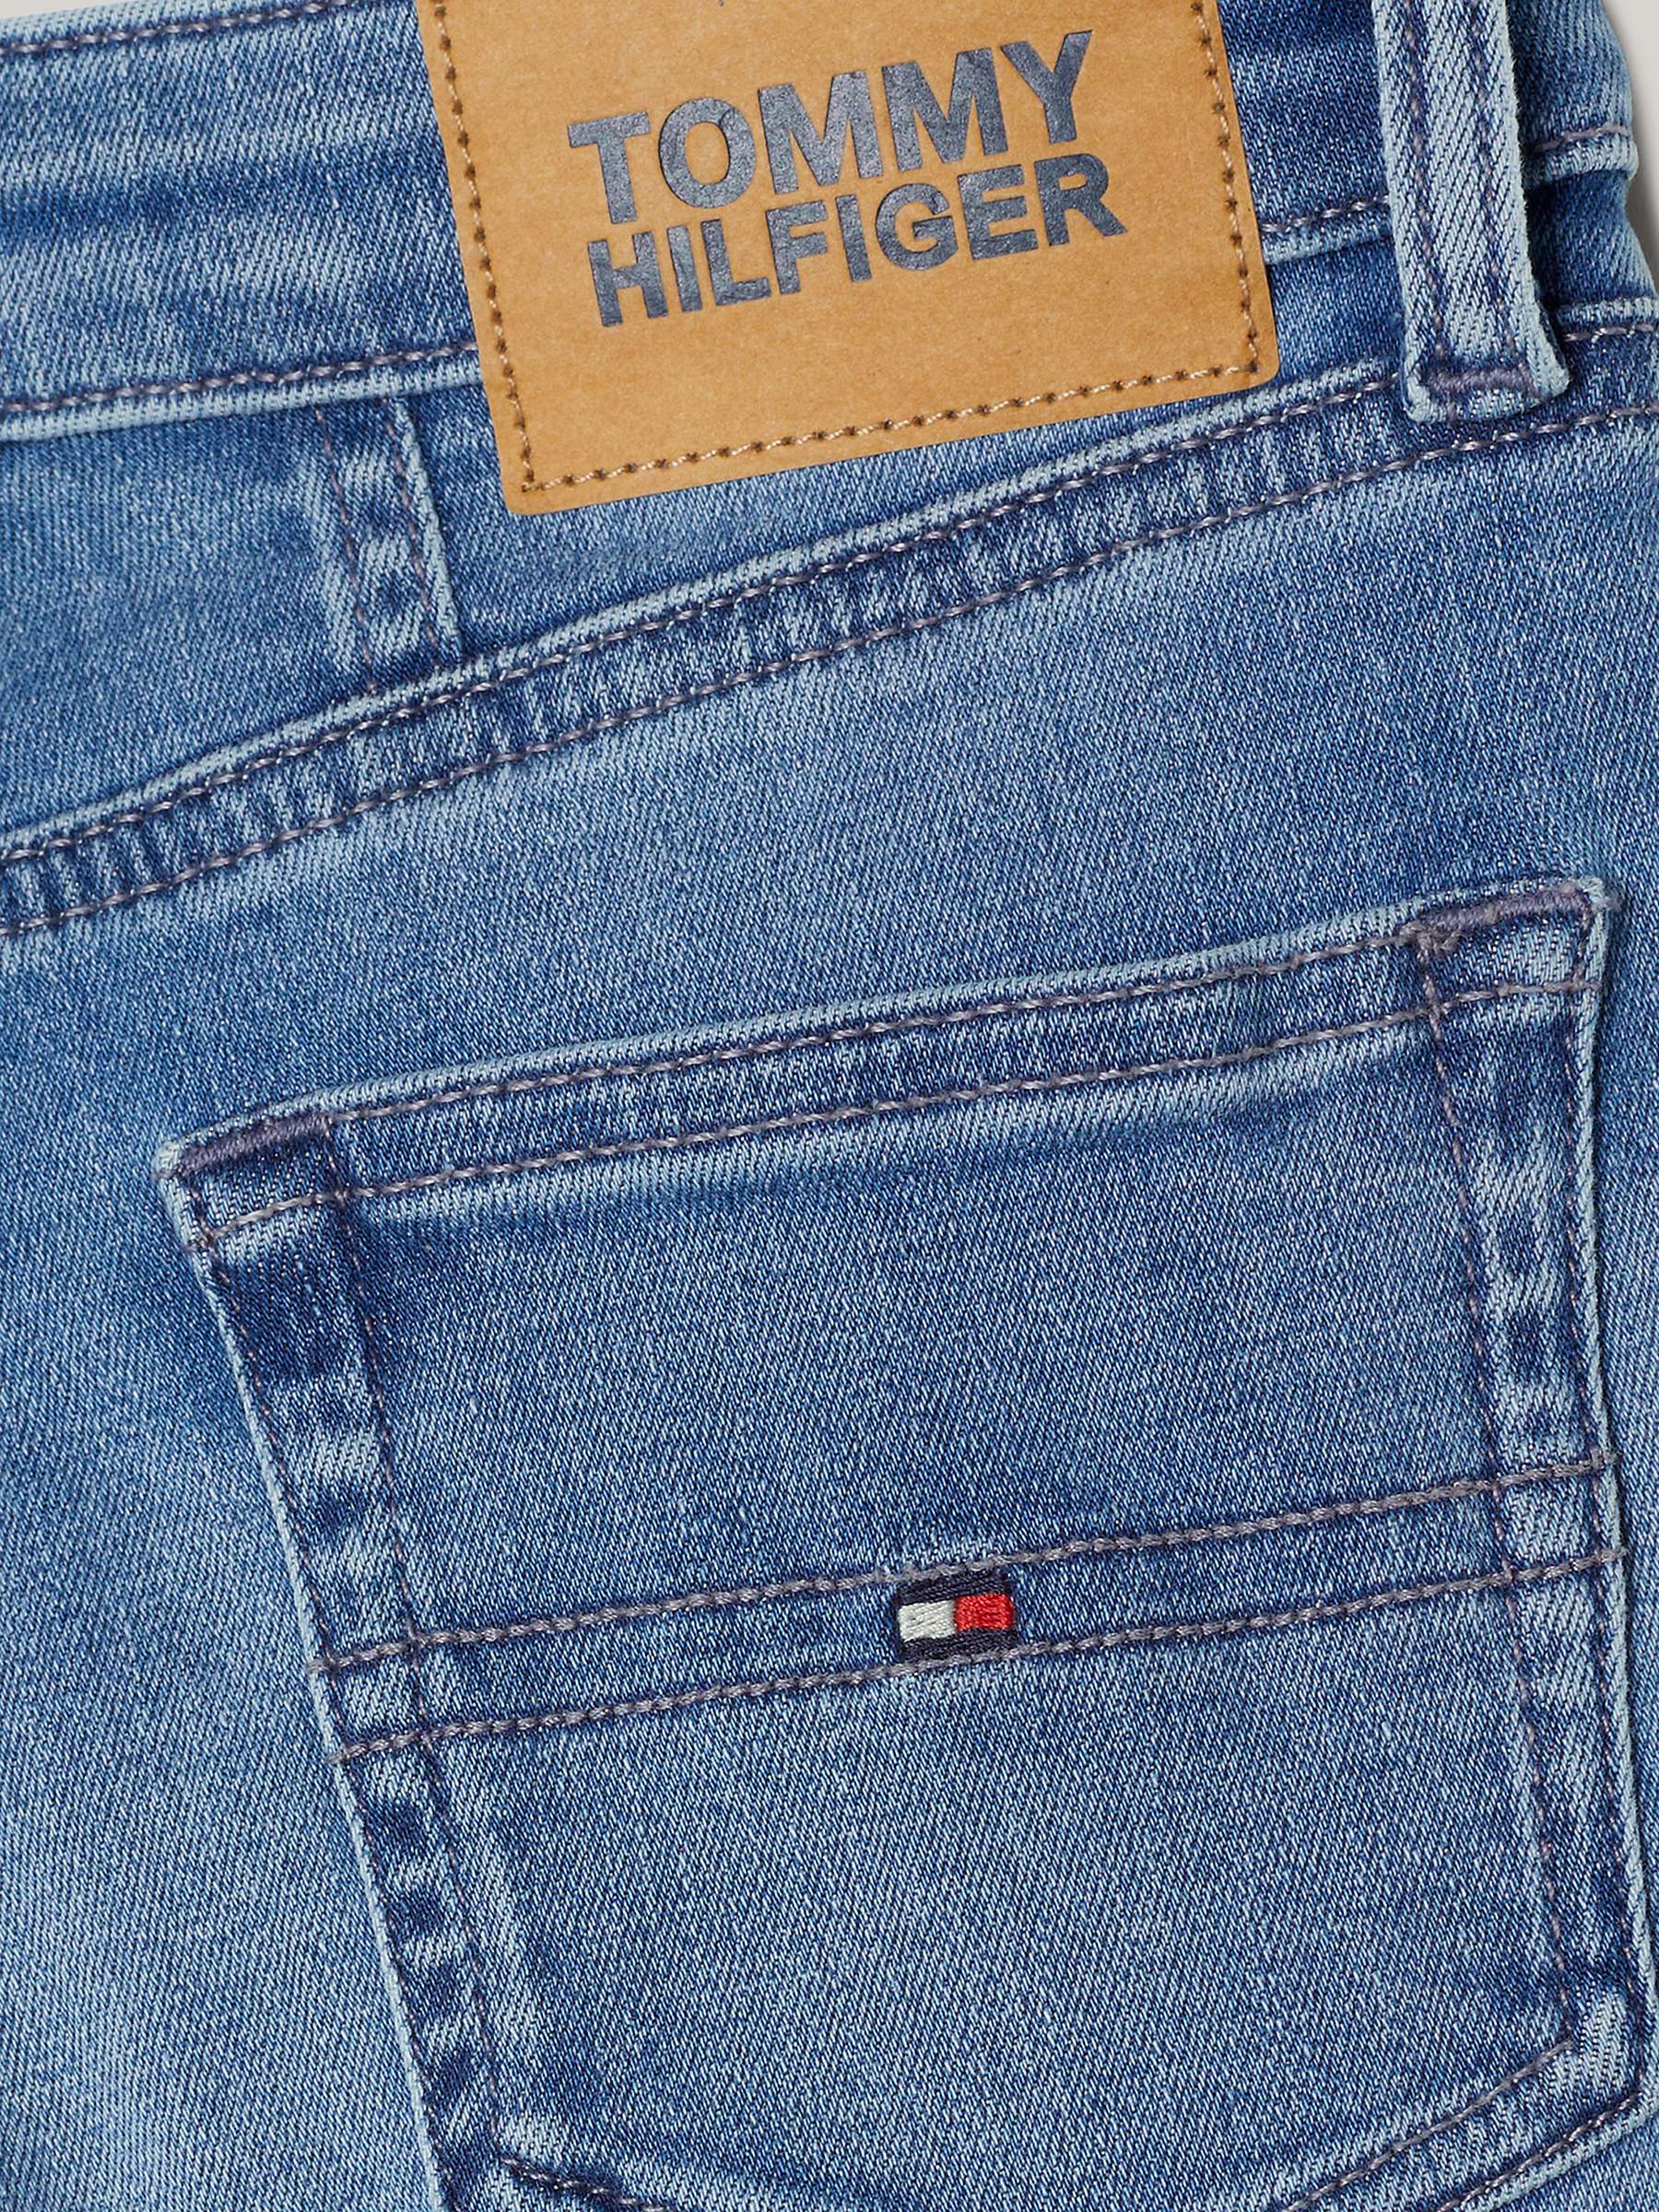 Buy Tommy Hilfiger Kids' High Rise Tapered Jeans, Maldive Mid Online at johnlewis.com